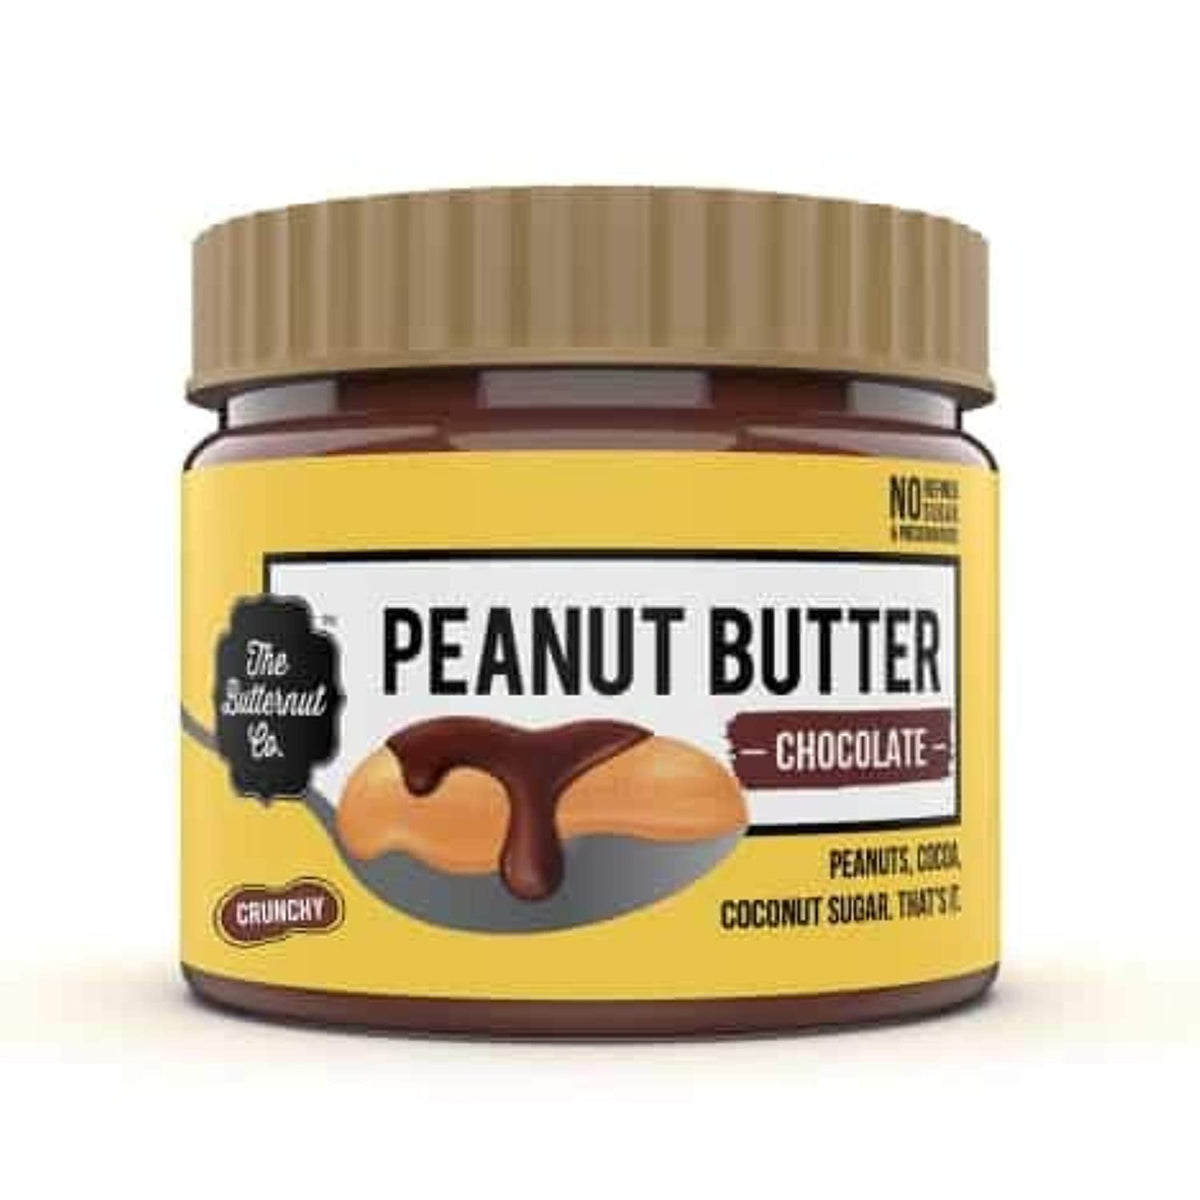 The Butternut Co. Peanut Butter Chocolate, Crunchy 340 gm (No Refined Sugar, High Protein, 100% Natural)